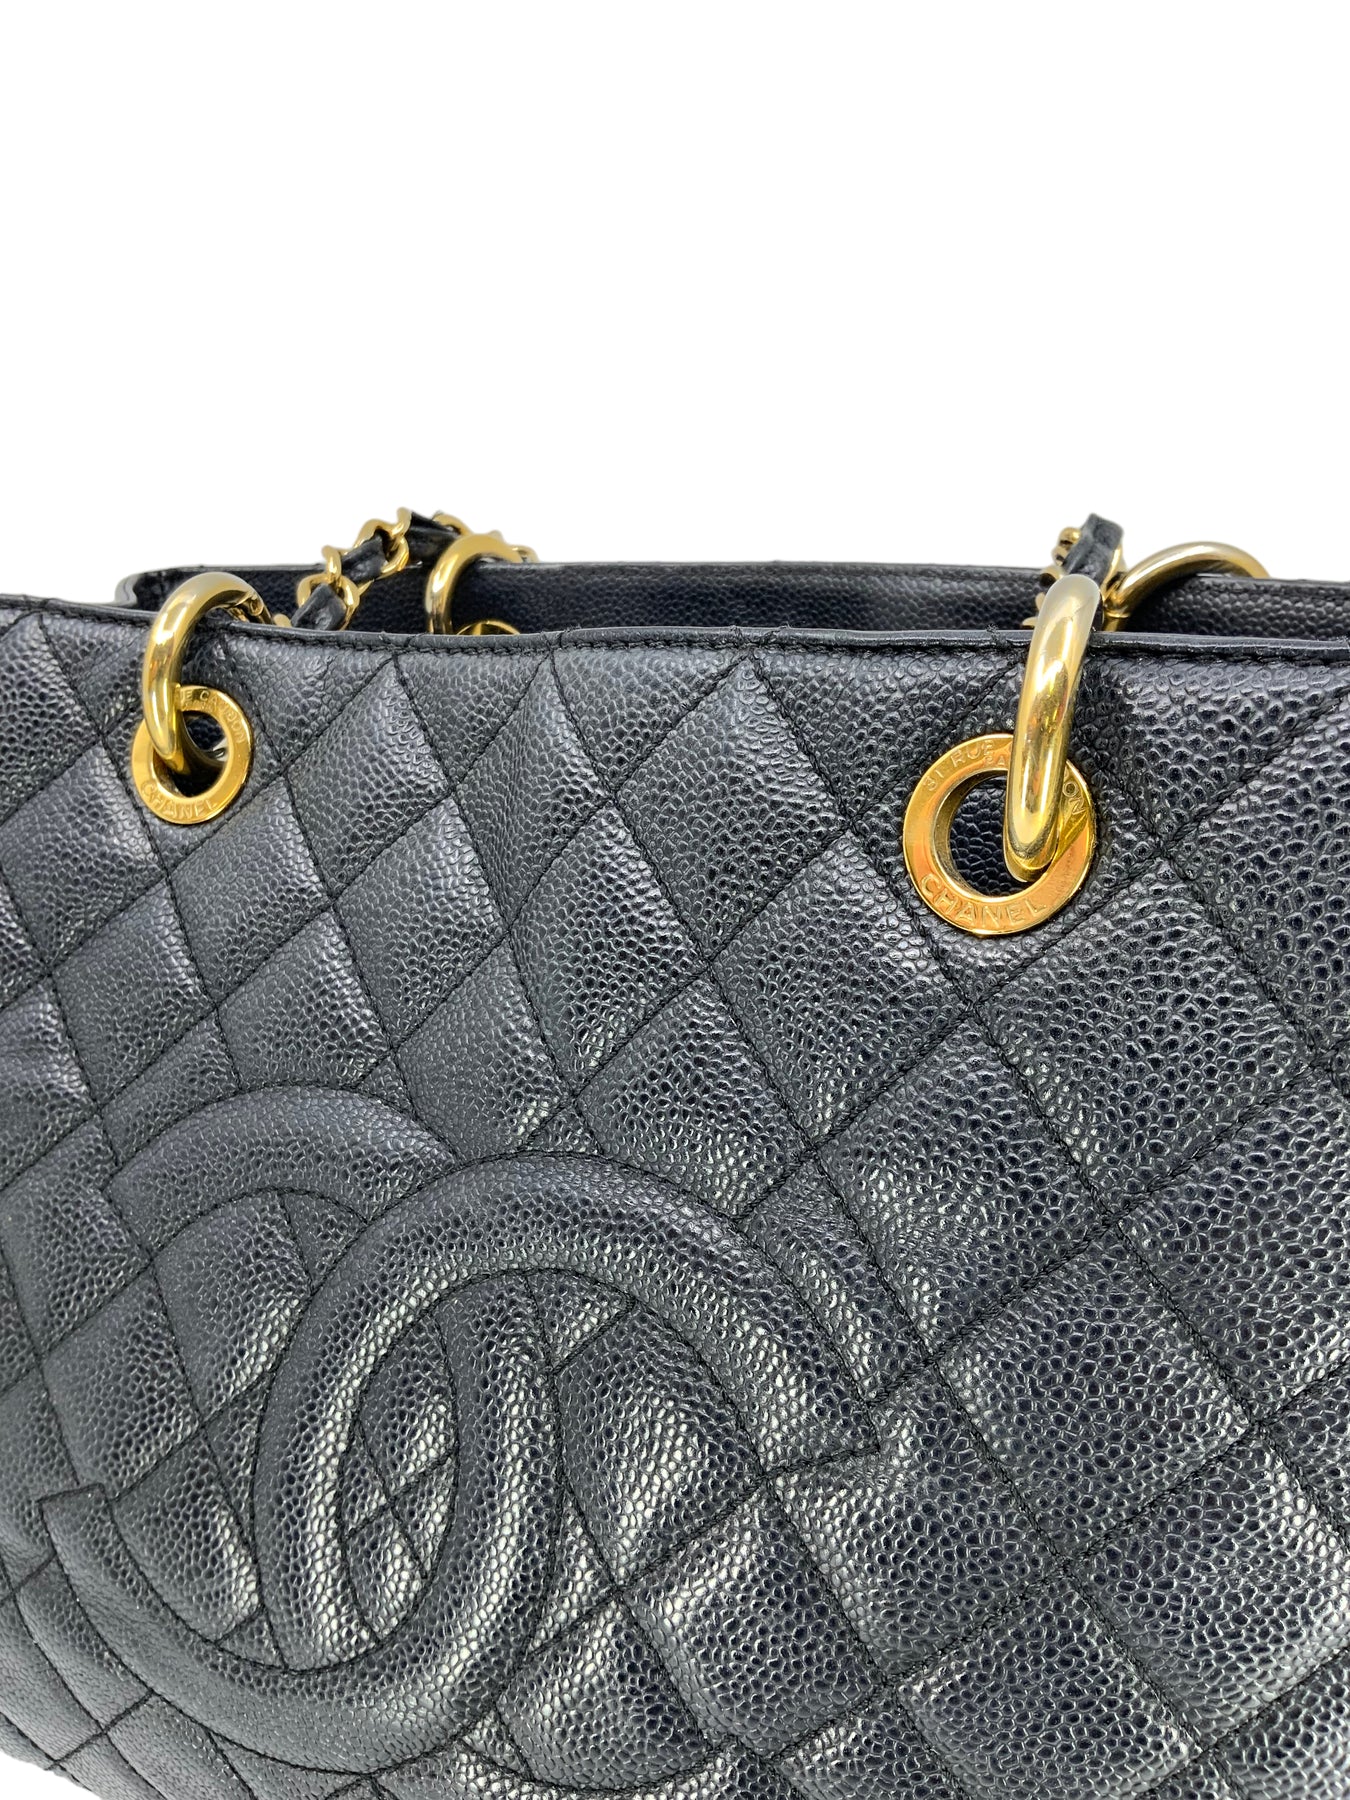 Chanel Black Quilted Caviar Leather Grand GST Shopper Tote Bag  STYLISHTOP